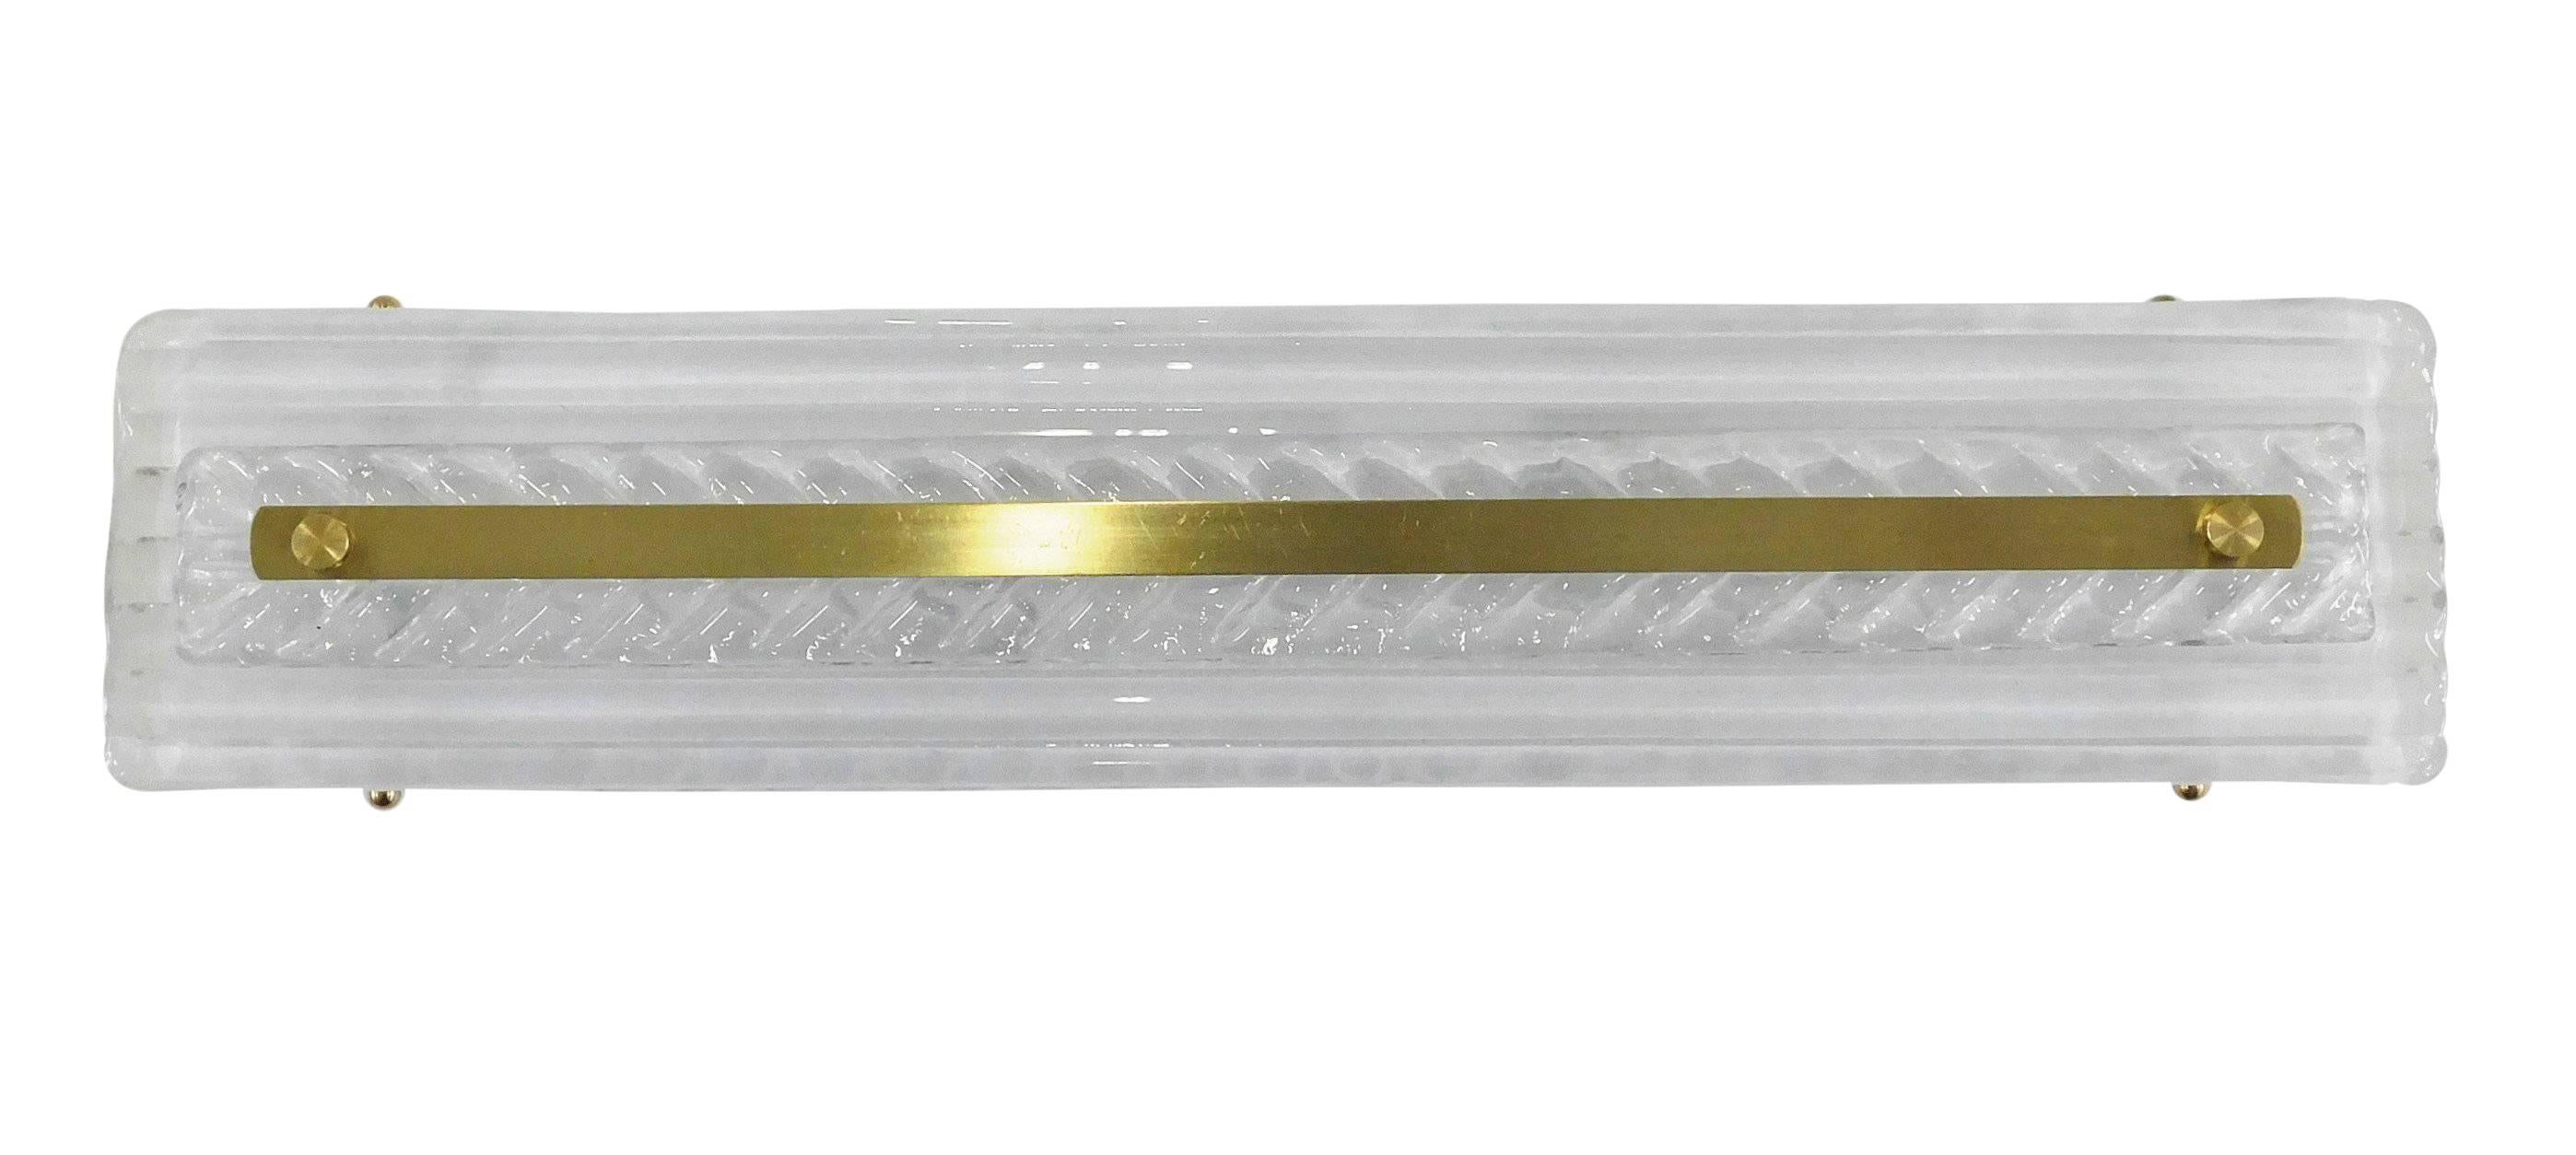 Italian wall light or flush mount shown in clear Murano glass with herringbone / chevron pattern and polished brass details / Designed by Fabio Bergomi / Made in Italy
2 lights / E12 or E14 type / max 40W each
Height: 25 inches / Width: 5 inches /